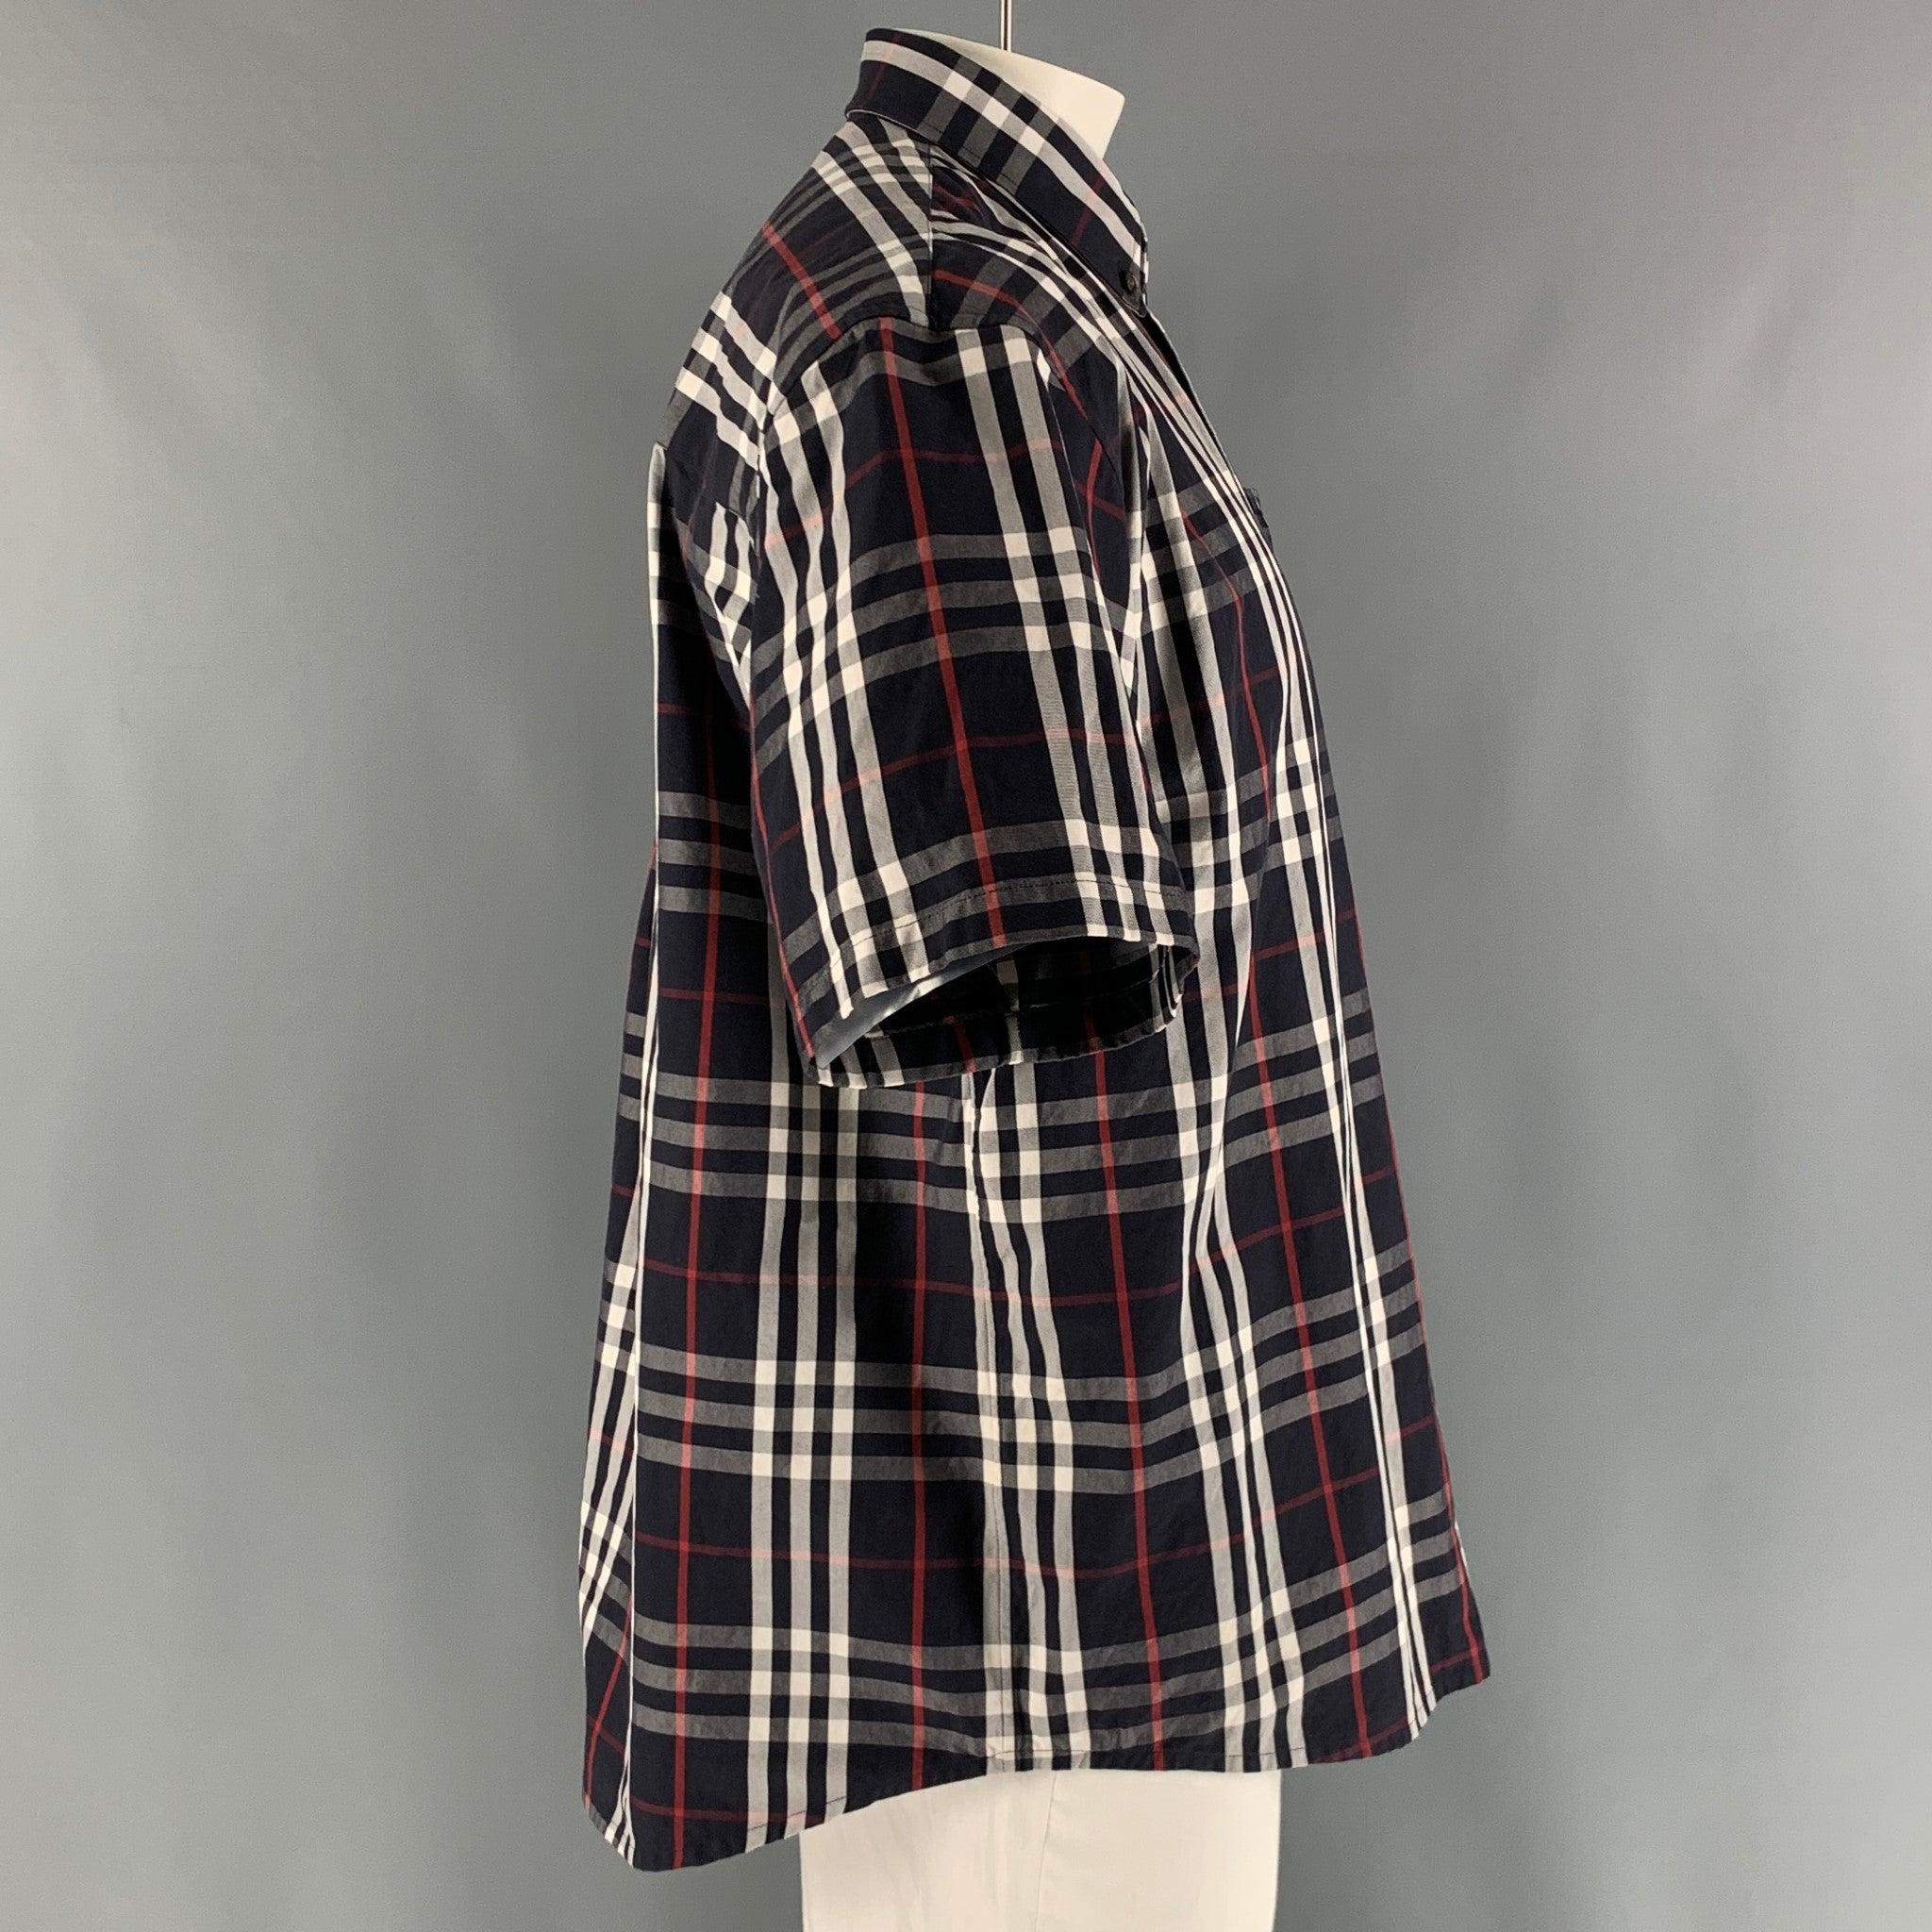 BURBERRY short sleeve shirt comes in a navy, white and red plaid cotton twill material featuring a button down collar, and a button up closure. Made in Italy. Excellent Pre-Owned Condition. 

Marked:   L 

Measurements: 
 
Shoulder: 22 inches Chest: